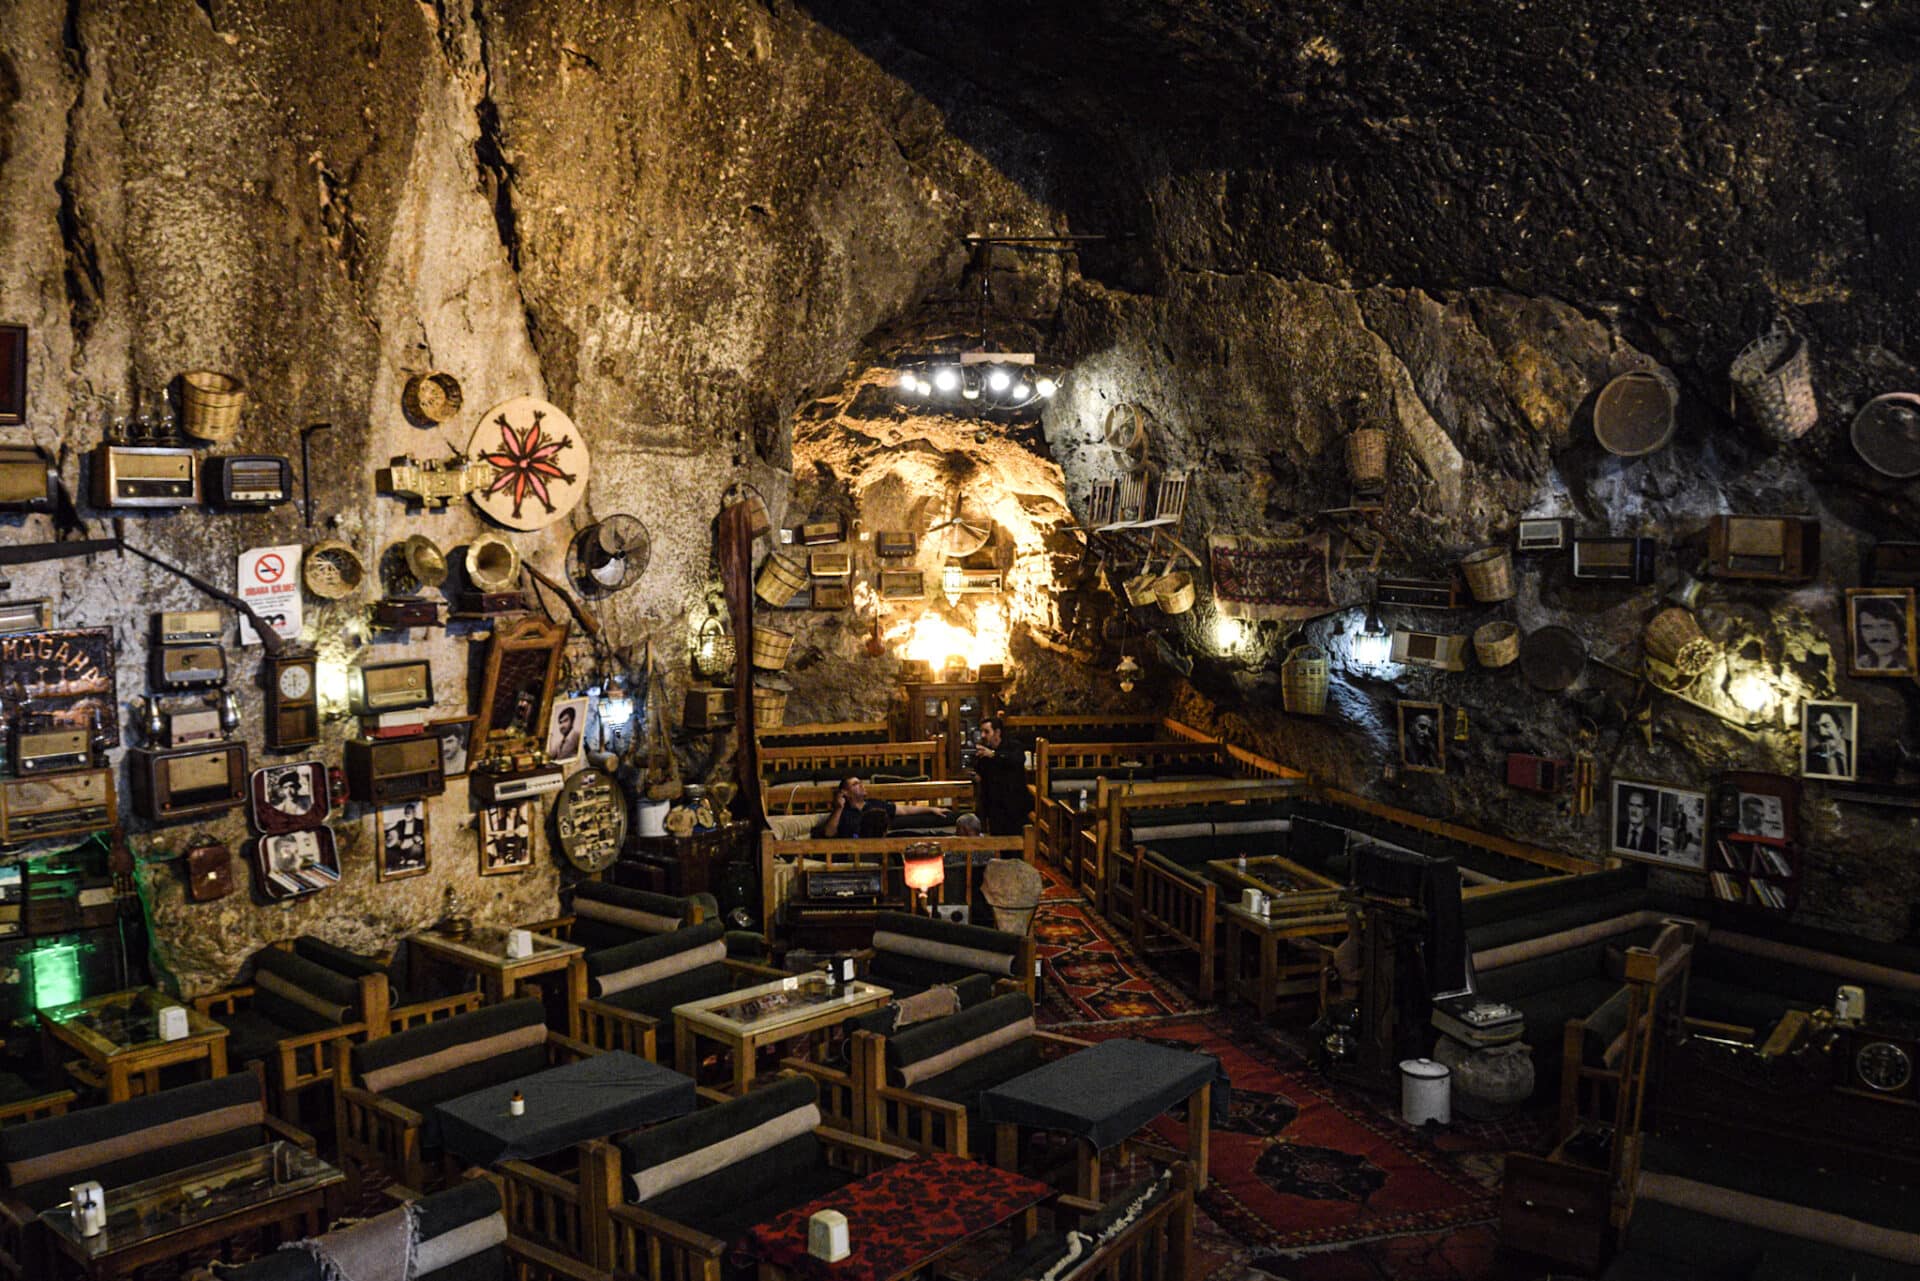 the main room of a peculiar cave café decorated with various antique items